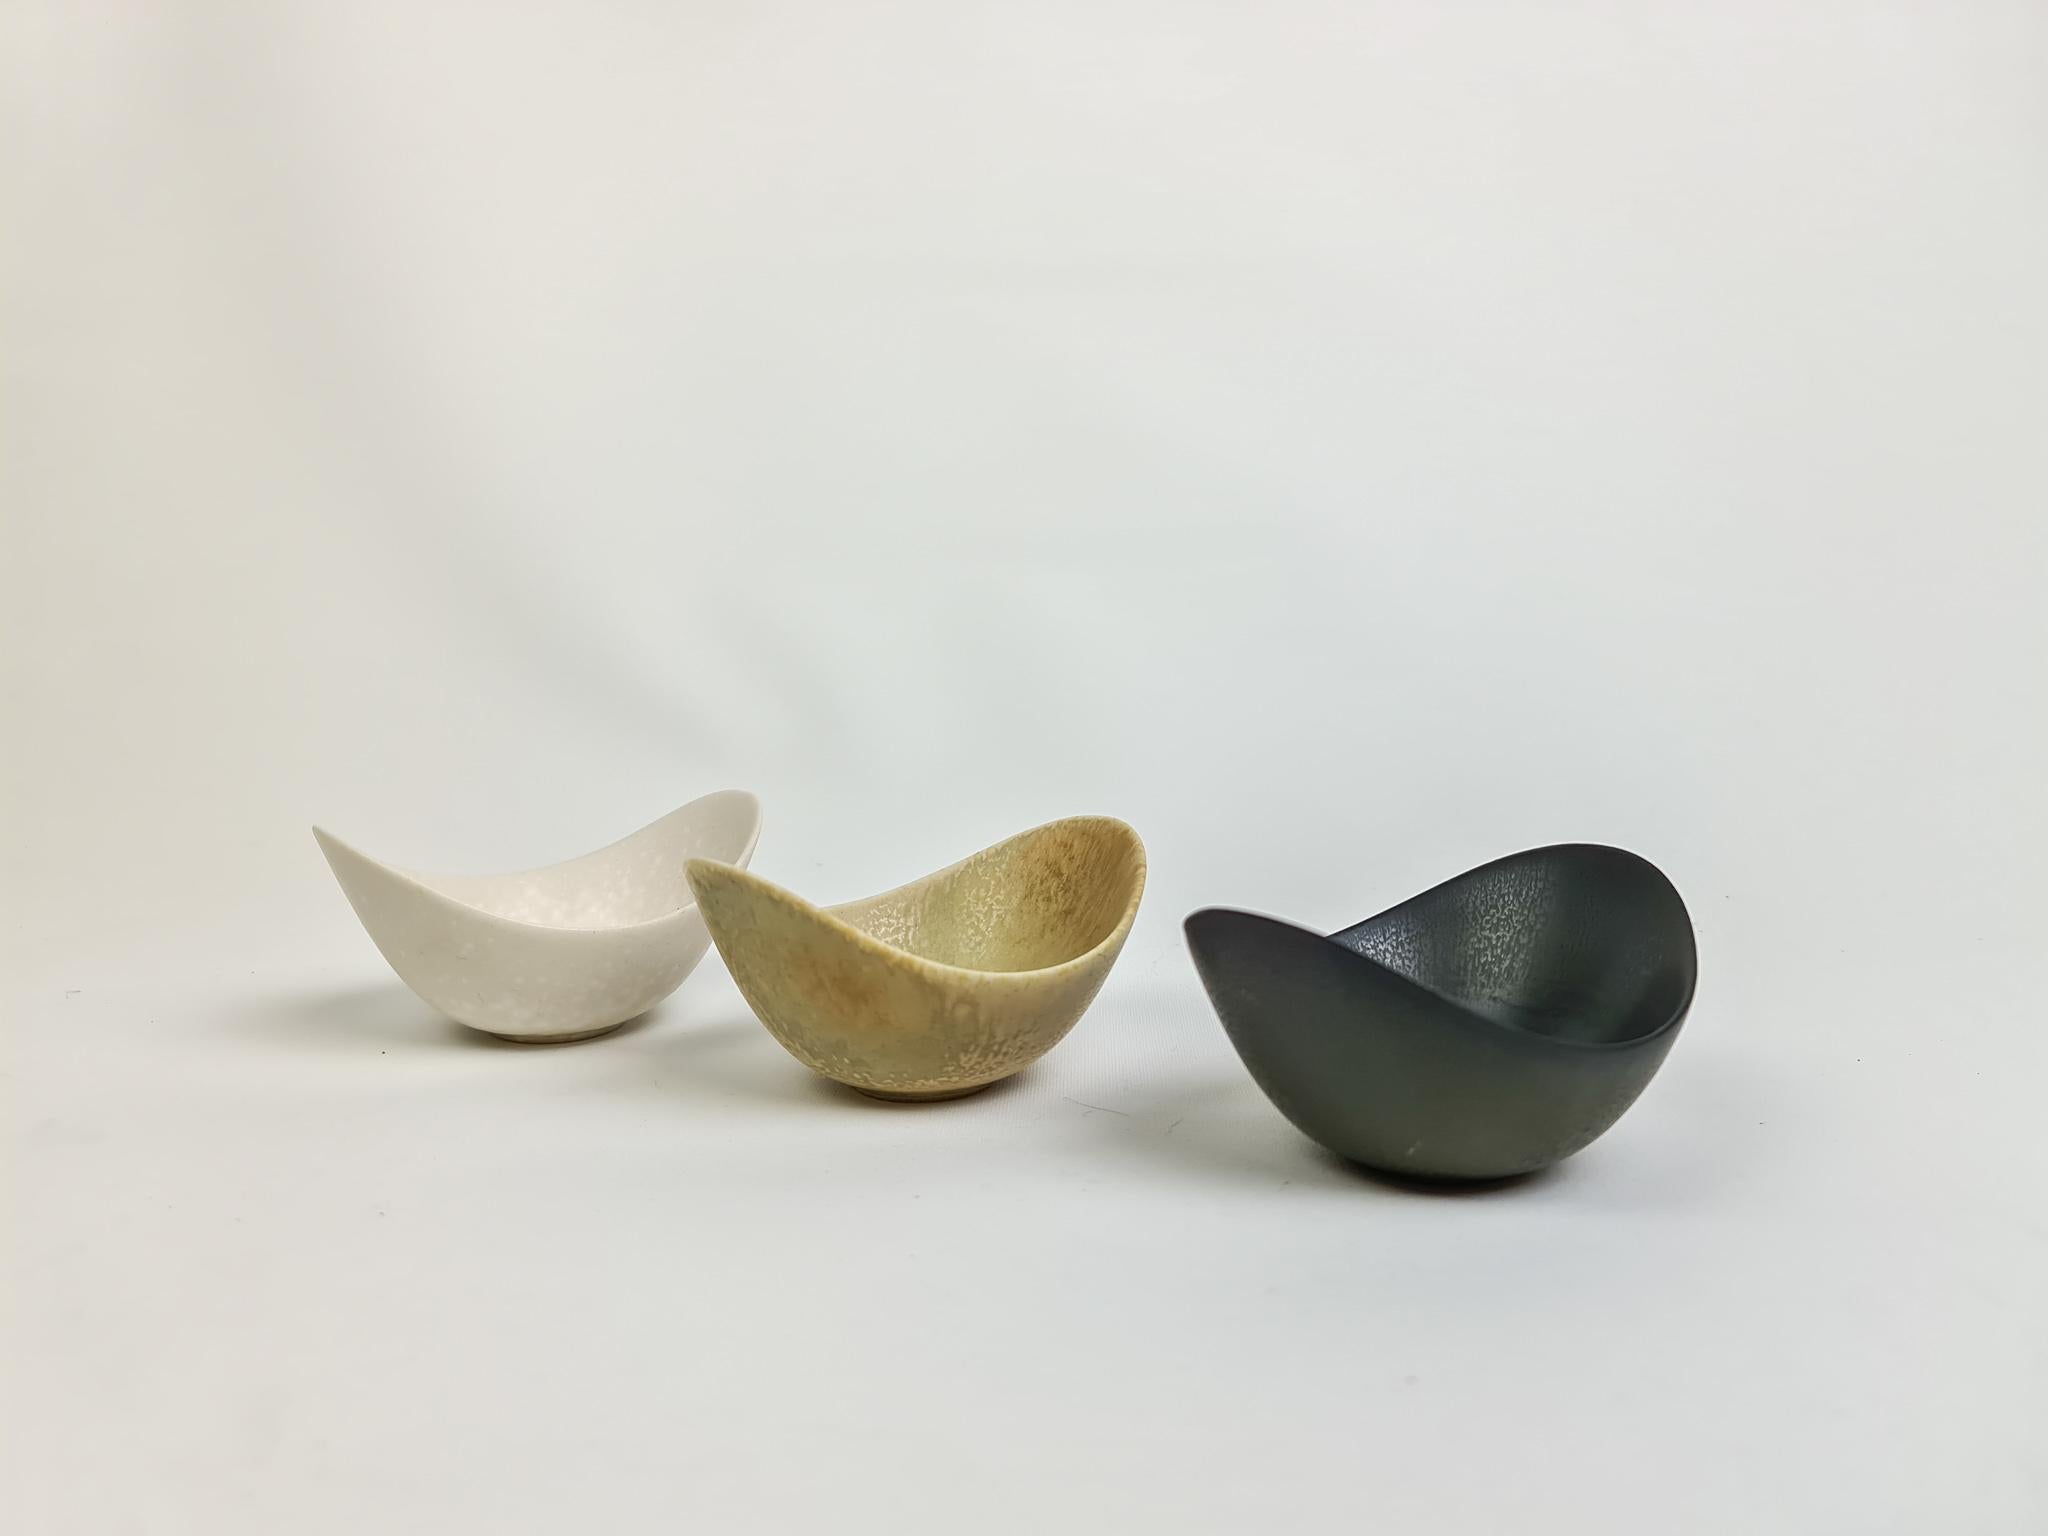 This wonderful collection of 3 small ARO bowls was created and designed by Gunnar Nylund at the Rörstrand Factory in the 1950s, Sweden.

The glaze is amazing and works with the articulate form of the bowls.

Very nice condition.

Measures: W